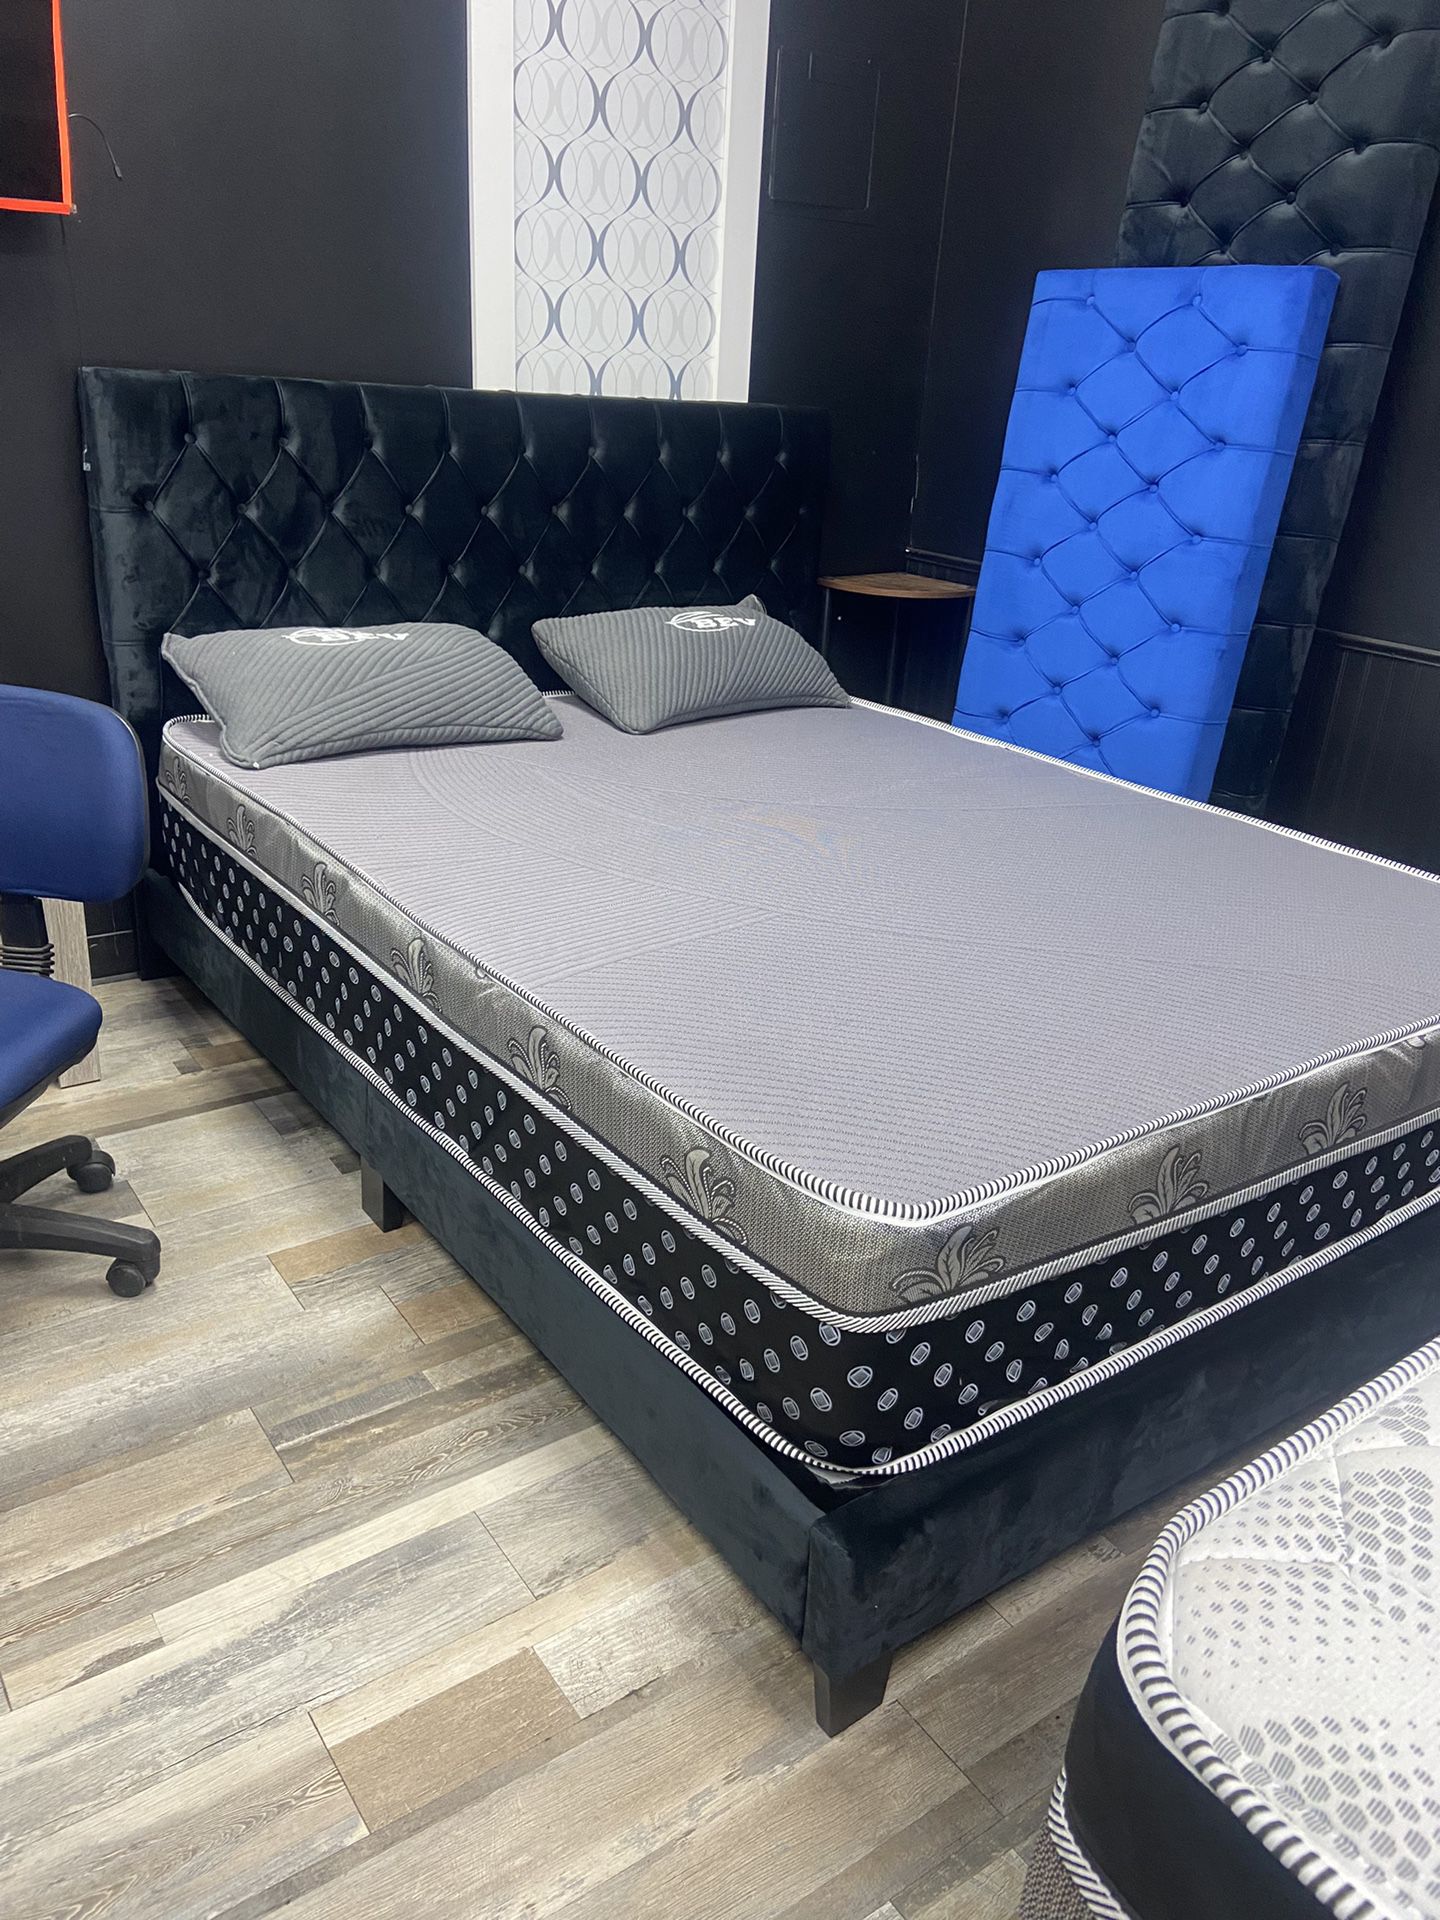 Queen Mattress - Double Sides - Come With Free Box Spring - Free Delivery 🚚 Today To Reasonable Distance